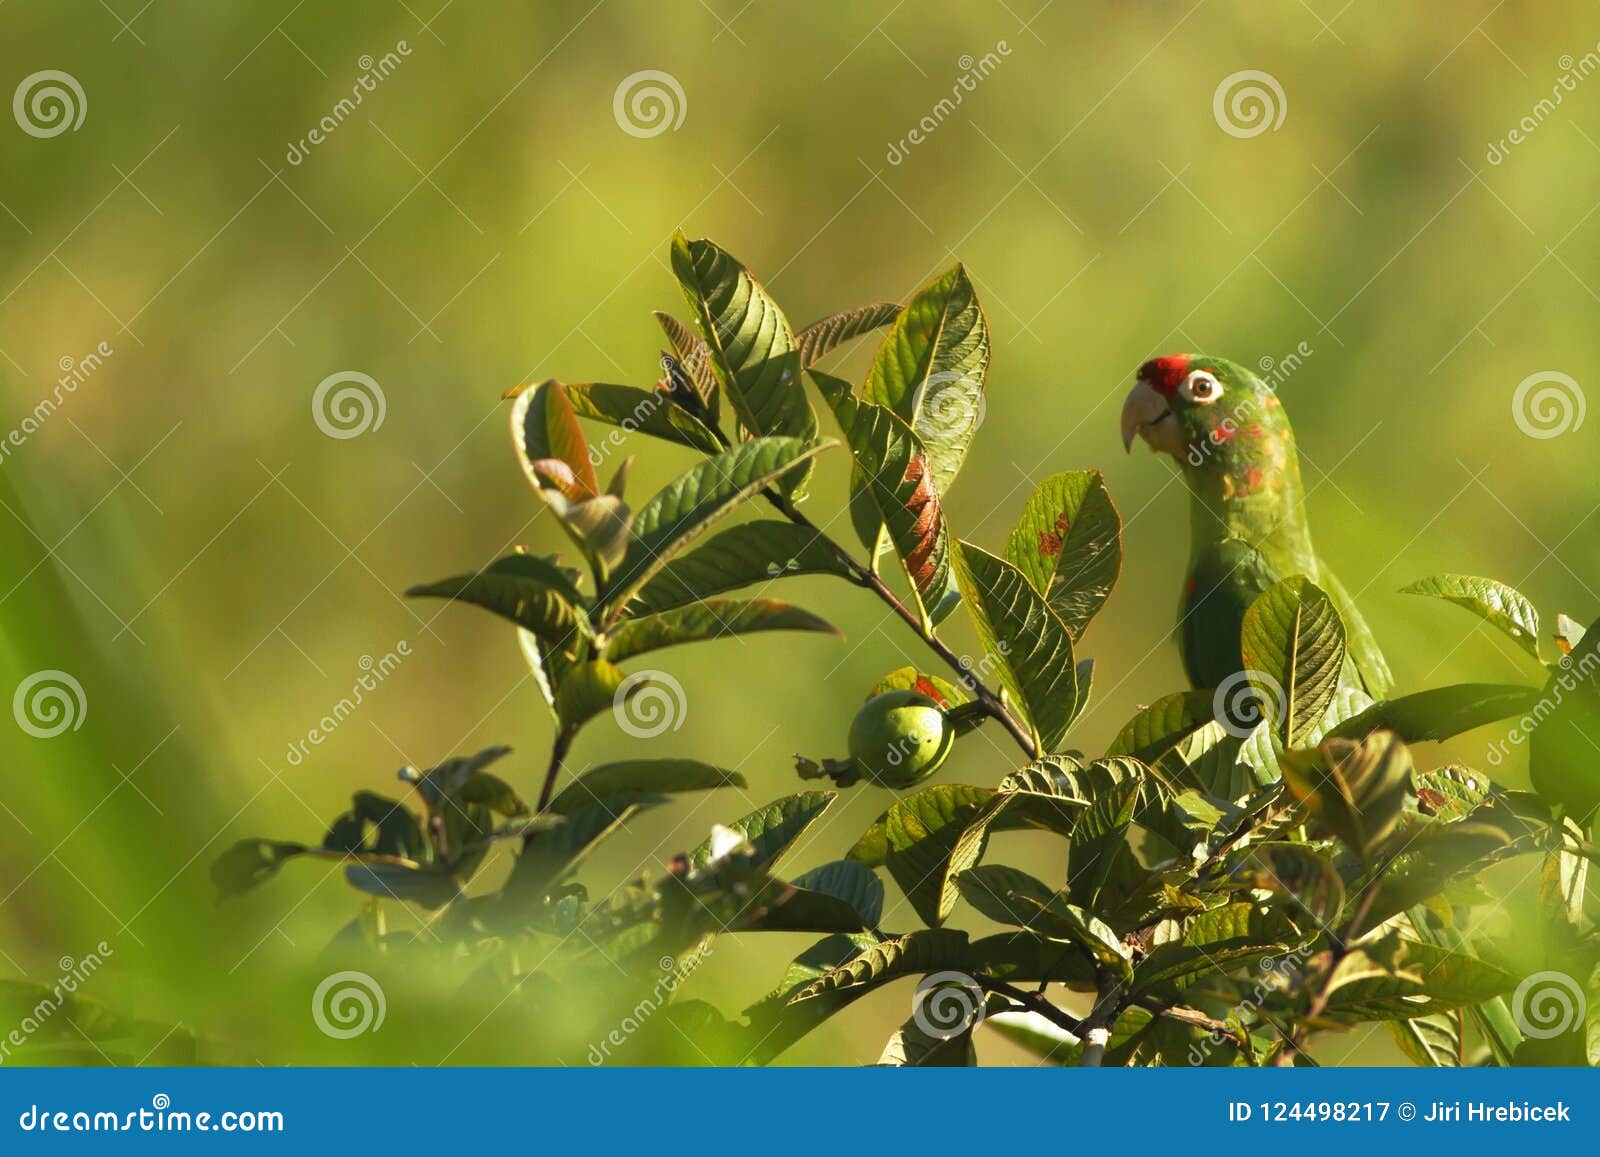 crimson-fronted parakeet - aratinga finschi sitting on tree in tropical mountain rain forest in costa rica, big green parrot with